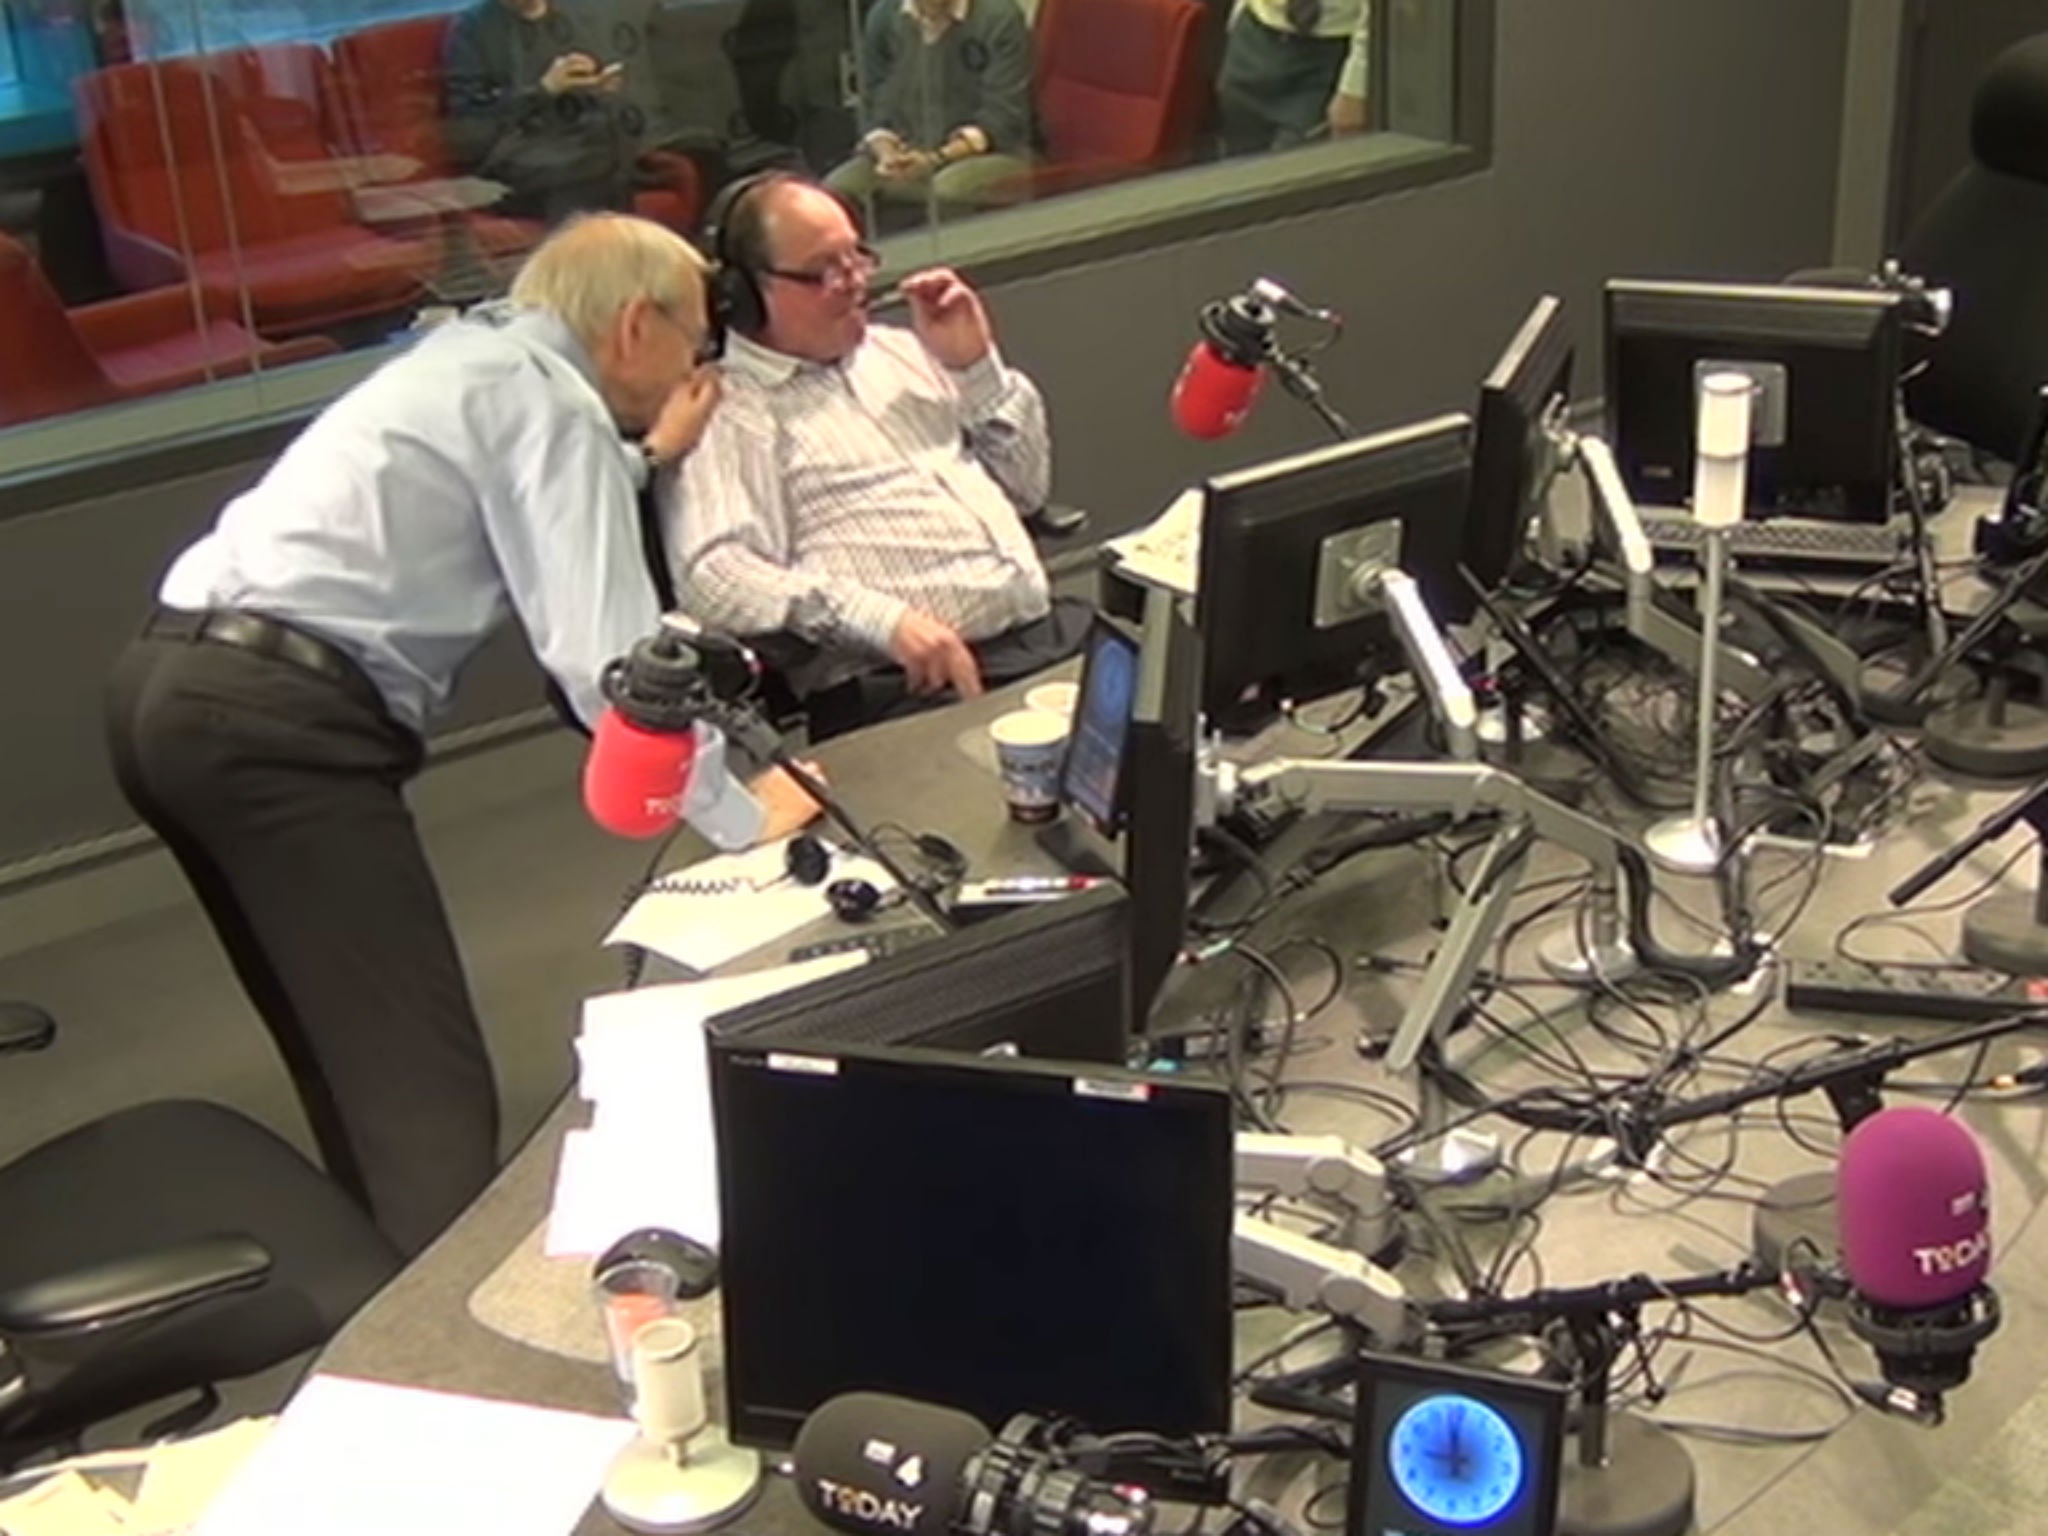 John Humphrys pats James Naughtie on the shoulder after his emotional farewell